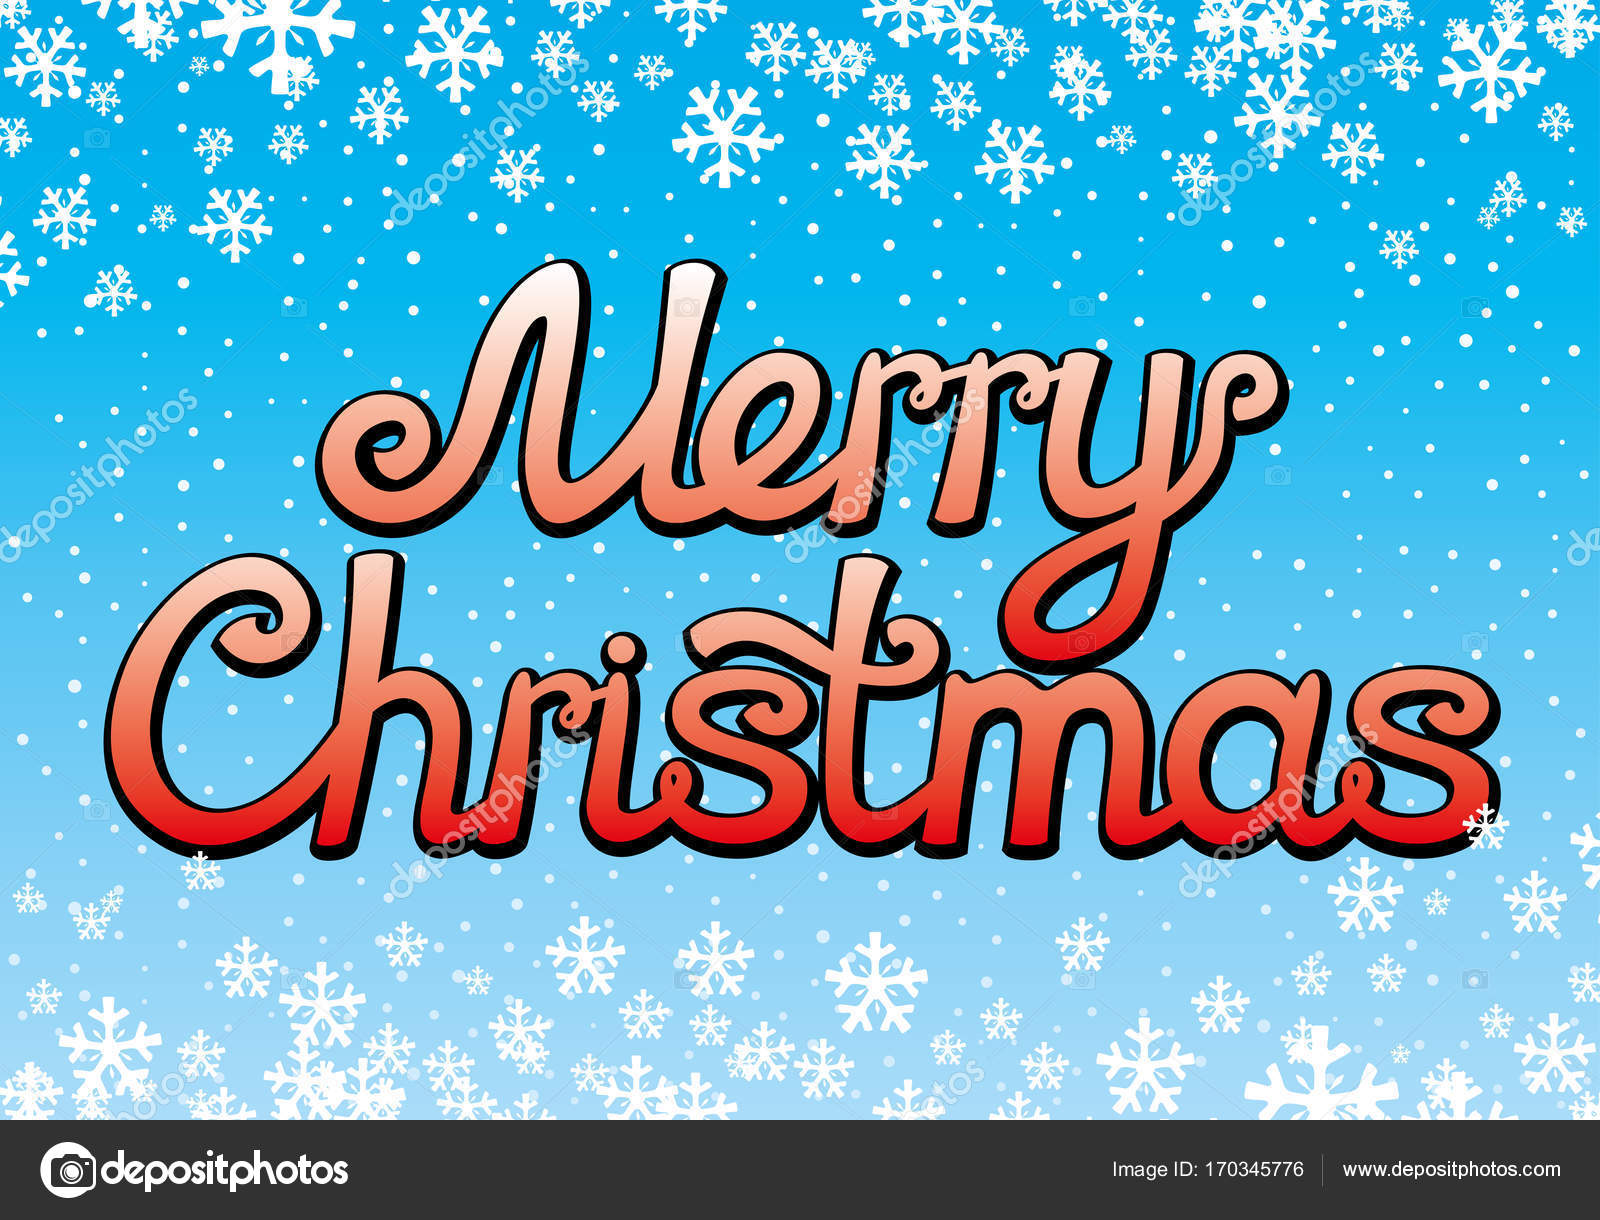 Merry Christmas wishes on a blue background — Vector by taronin